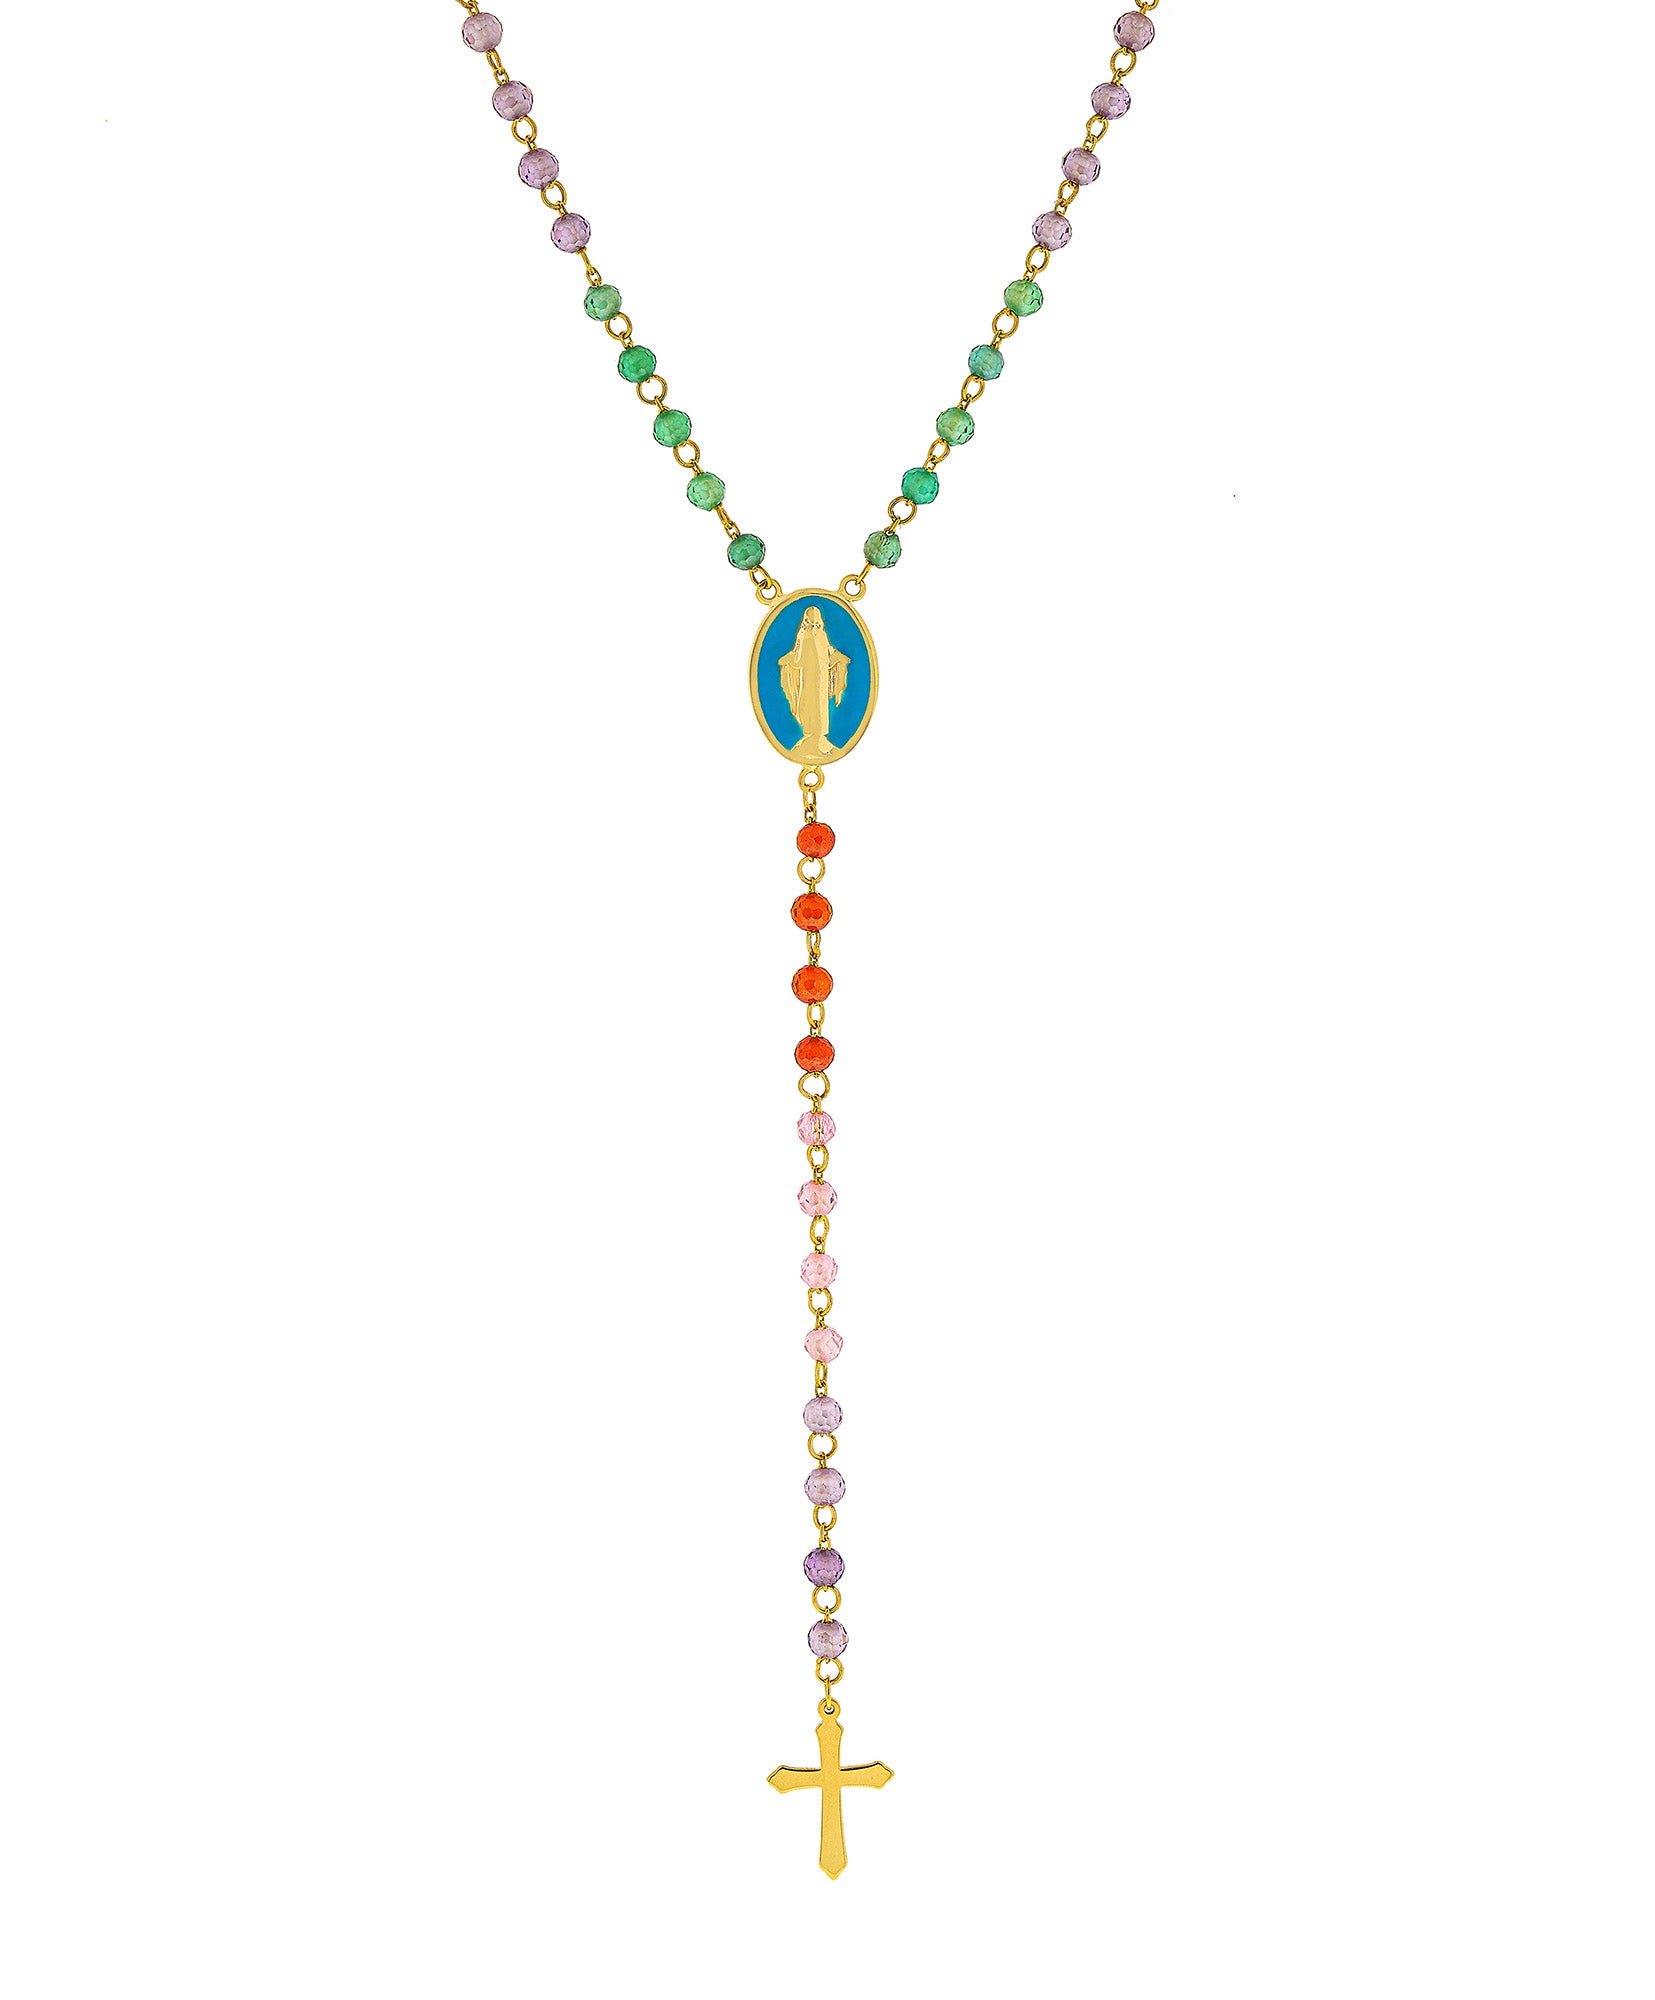  J by boghossian, white diamonds, gold, necklace, rosemary, turquoise enamel